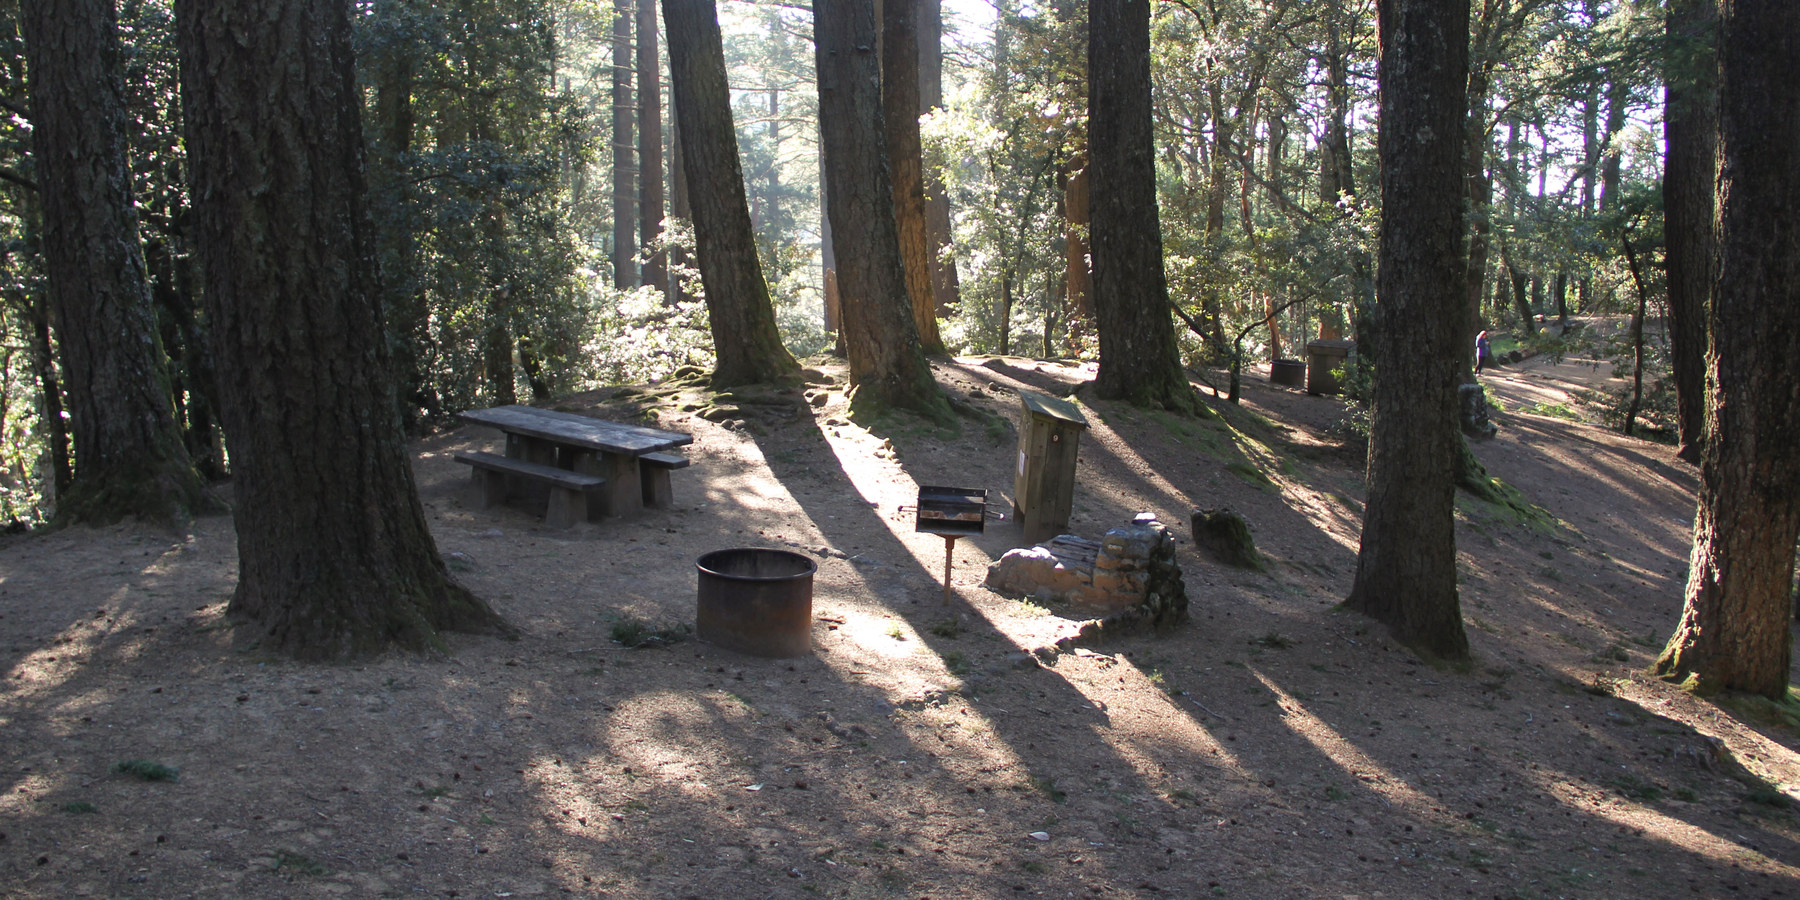 Camping On The Northern California Coast Outdoor Project